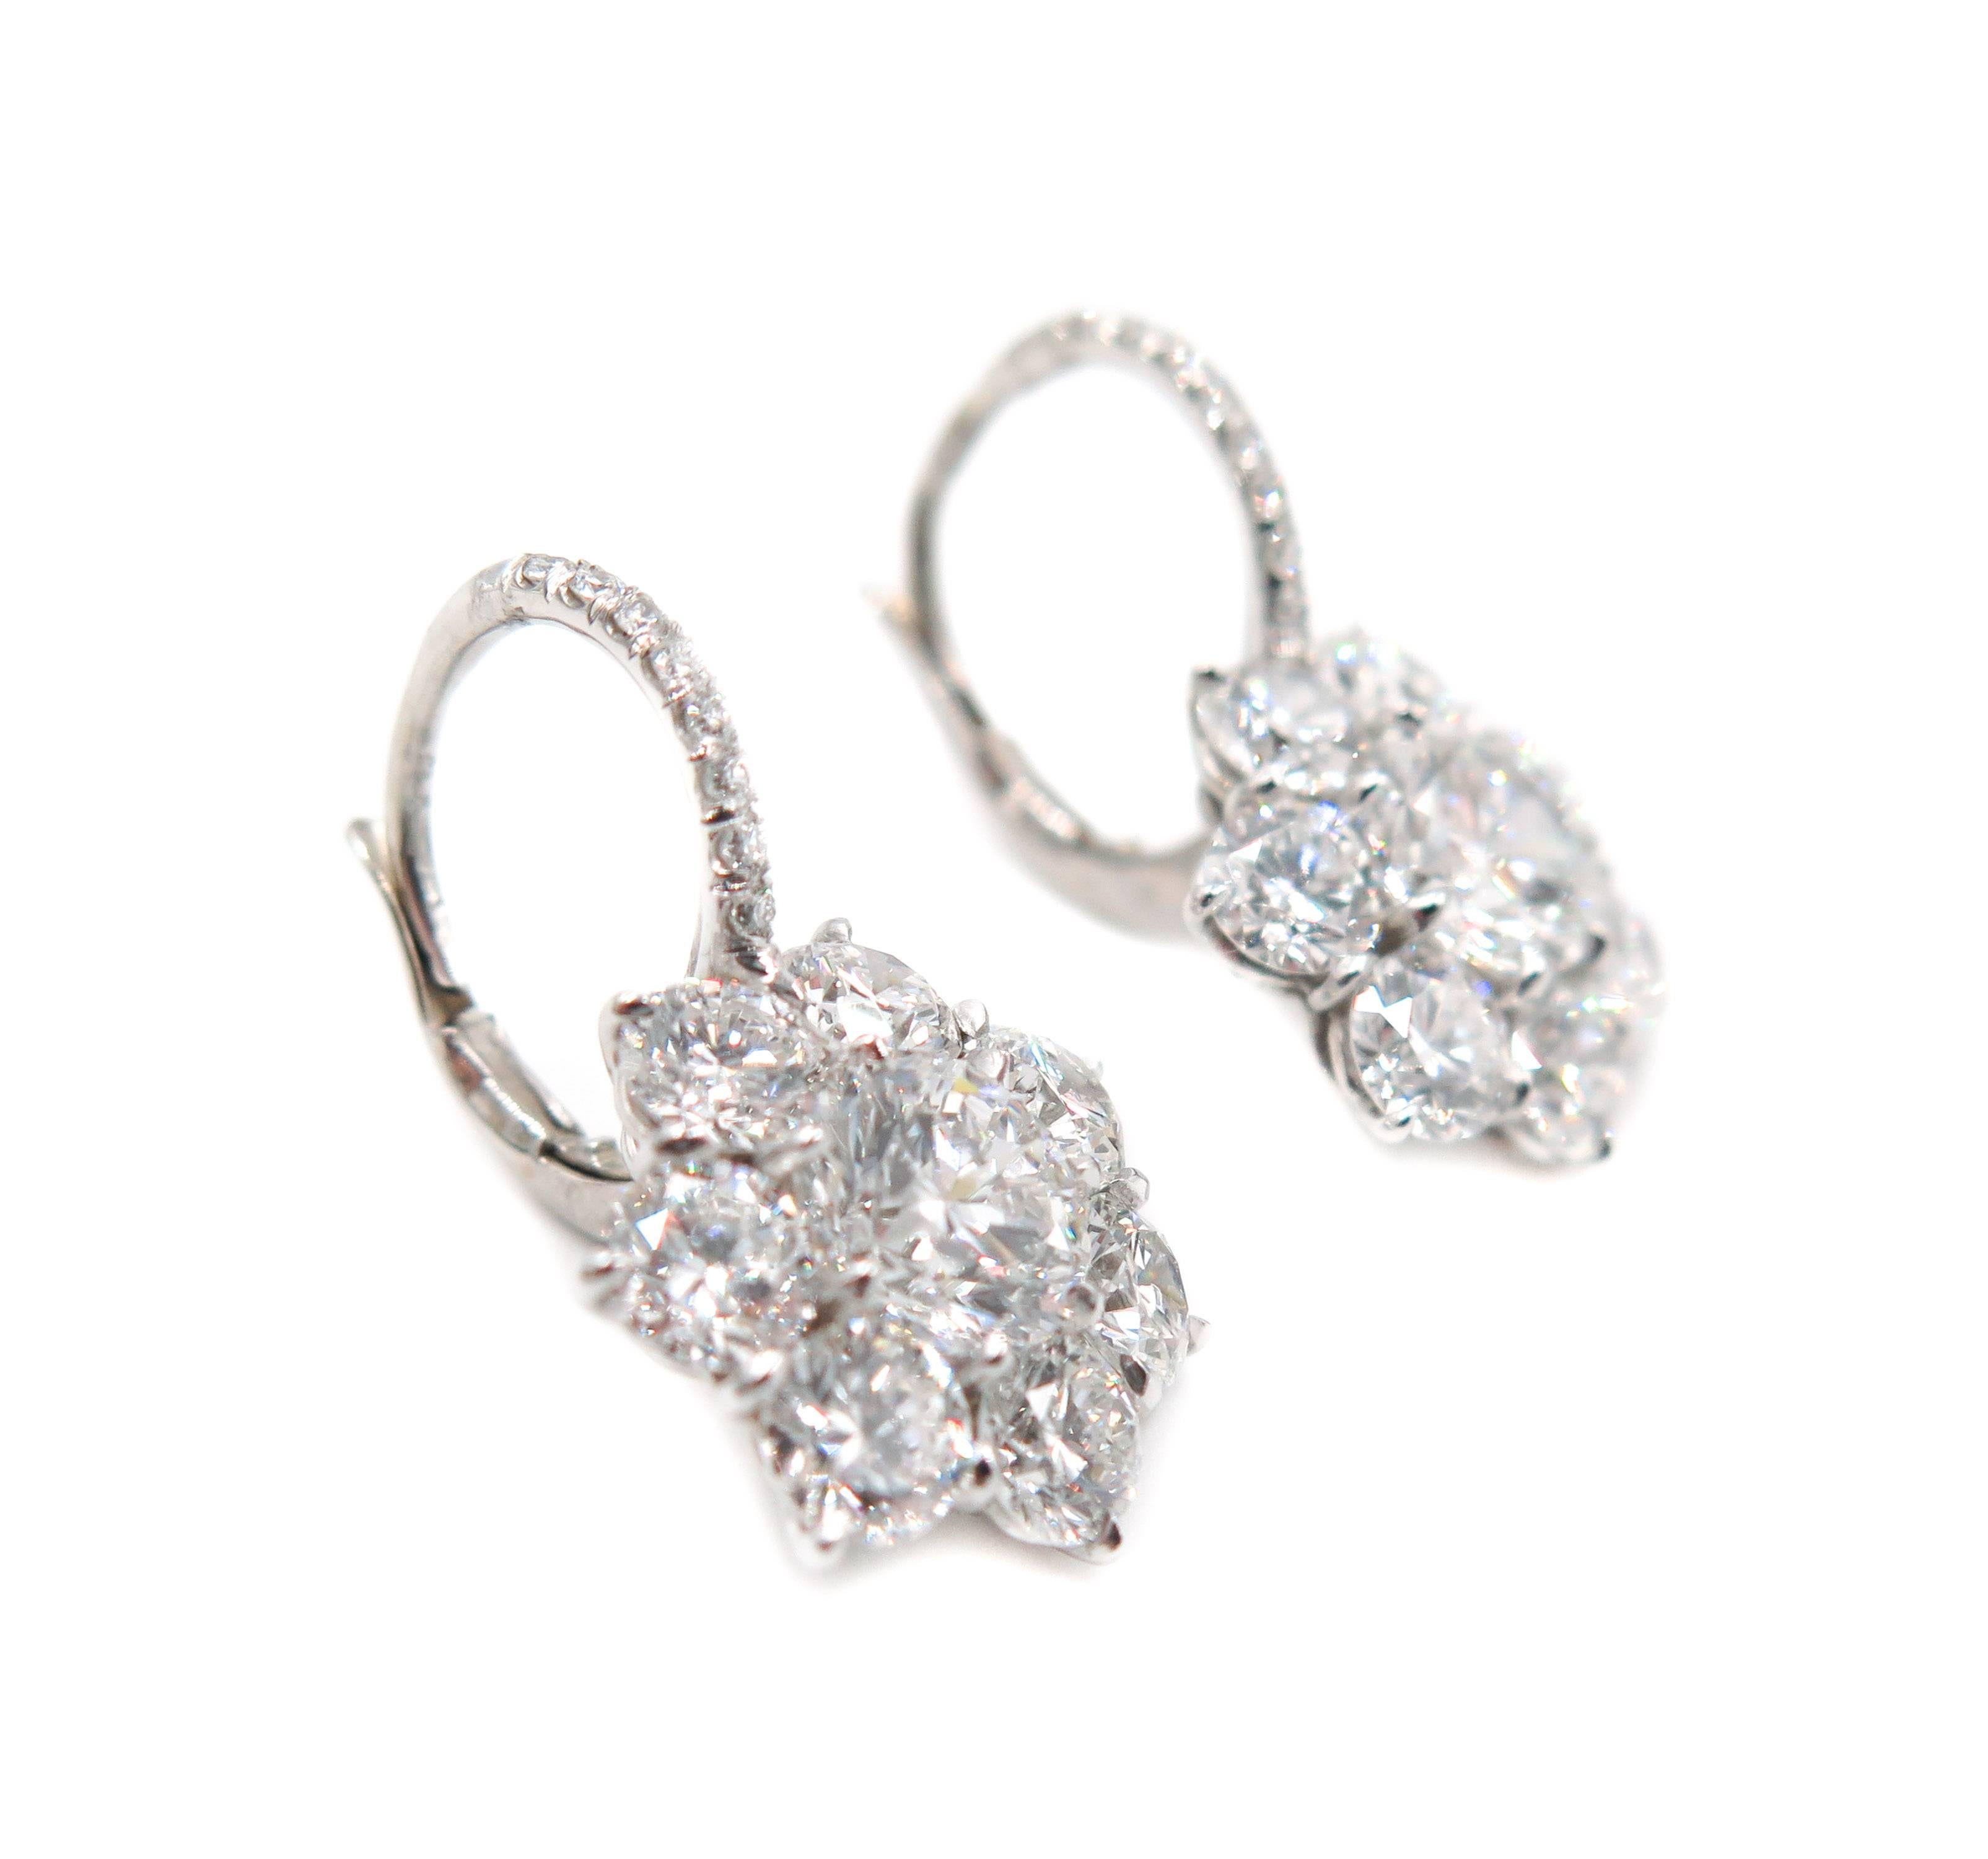 A little more inspired... yet very wearable. 
A gorgeous diamond cluster earrings arranged in a floral shape. 
Handcrafted in Platinum with a total of 5.45 carats of diamonds.
Both center diamonds weight 1.00 carat each (GIA certified), yet appears